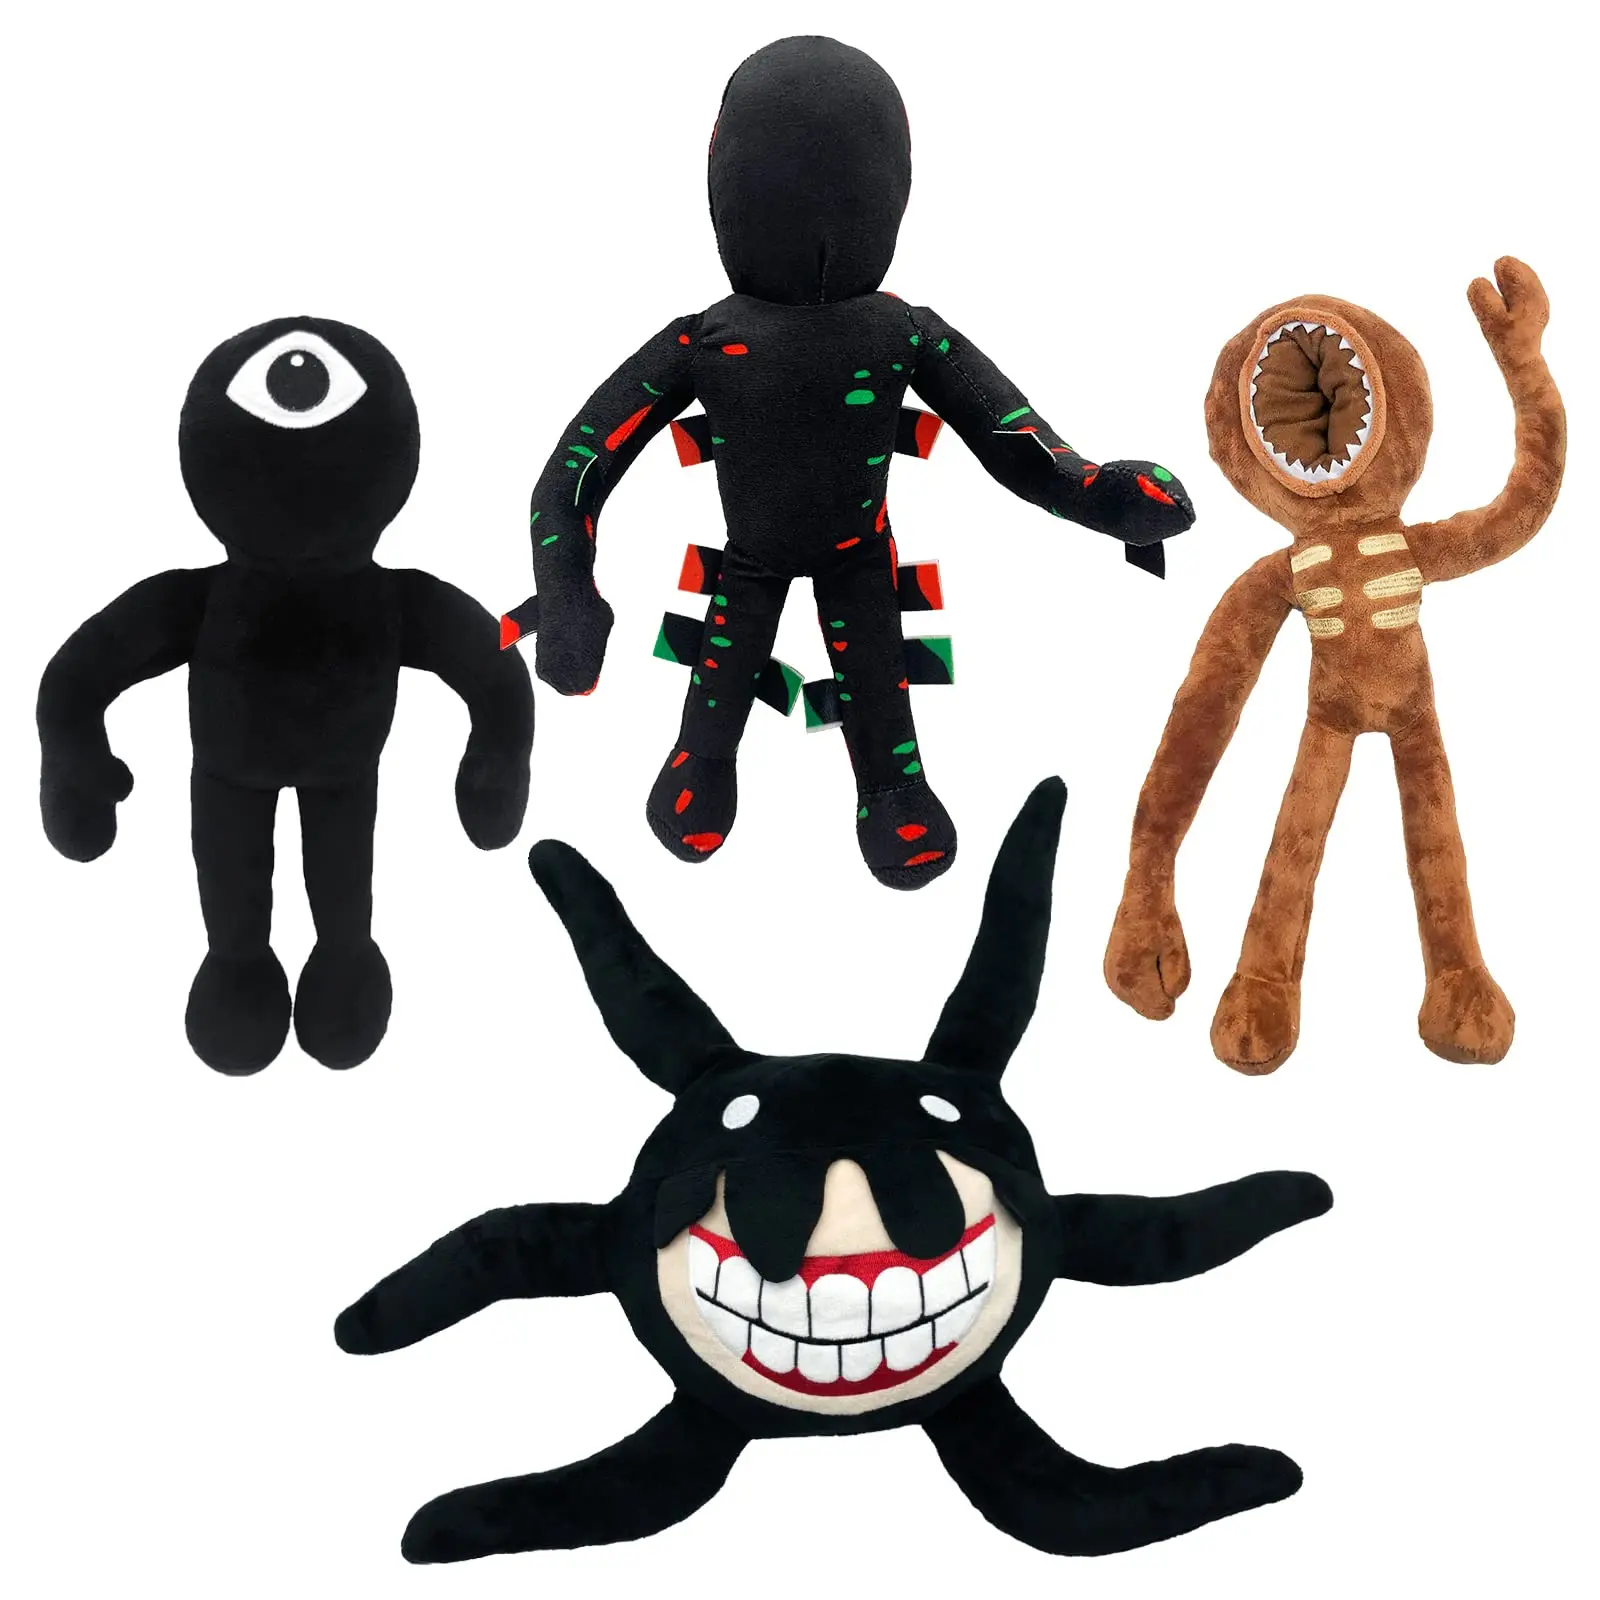 Doors Plush - 12 Glitch Plushies Toy for Fans Gift, 2022 New Monster  Horror Game Stuffed Figure Doll for Kids and Adults, Halloween Christmas